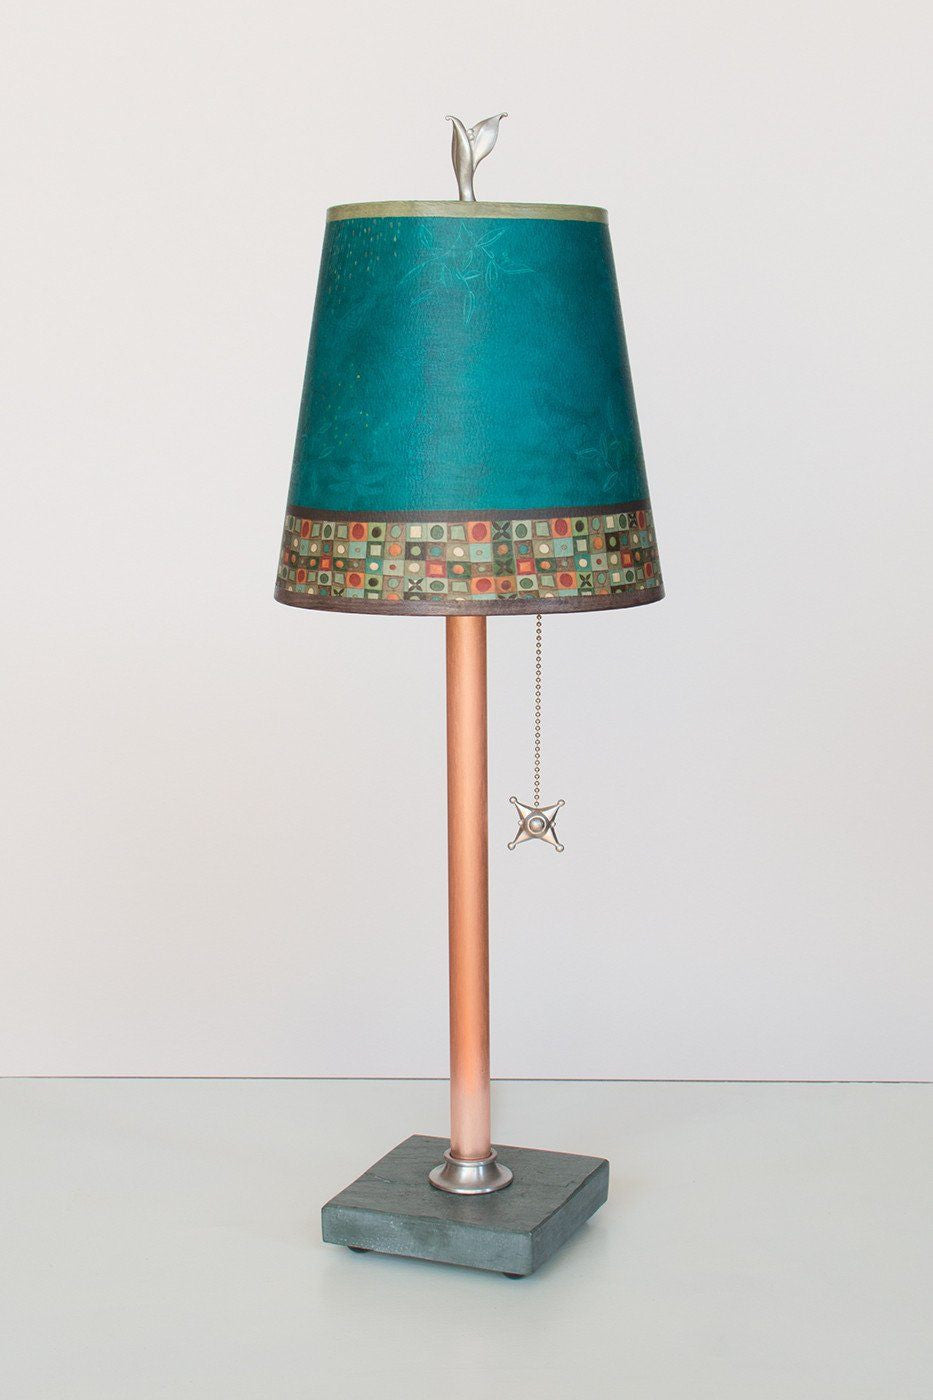 Janna Ugone &amp; Co Table Lamps Copper Table Lamp with Small Drum Shade in Jade Mosaic